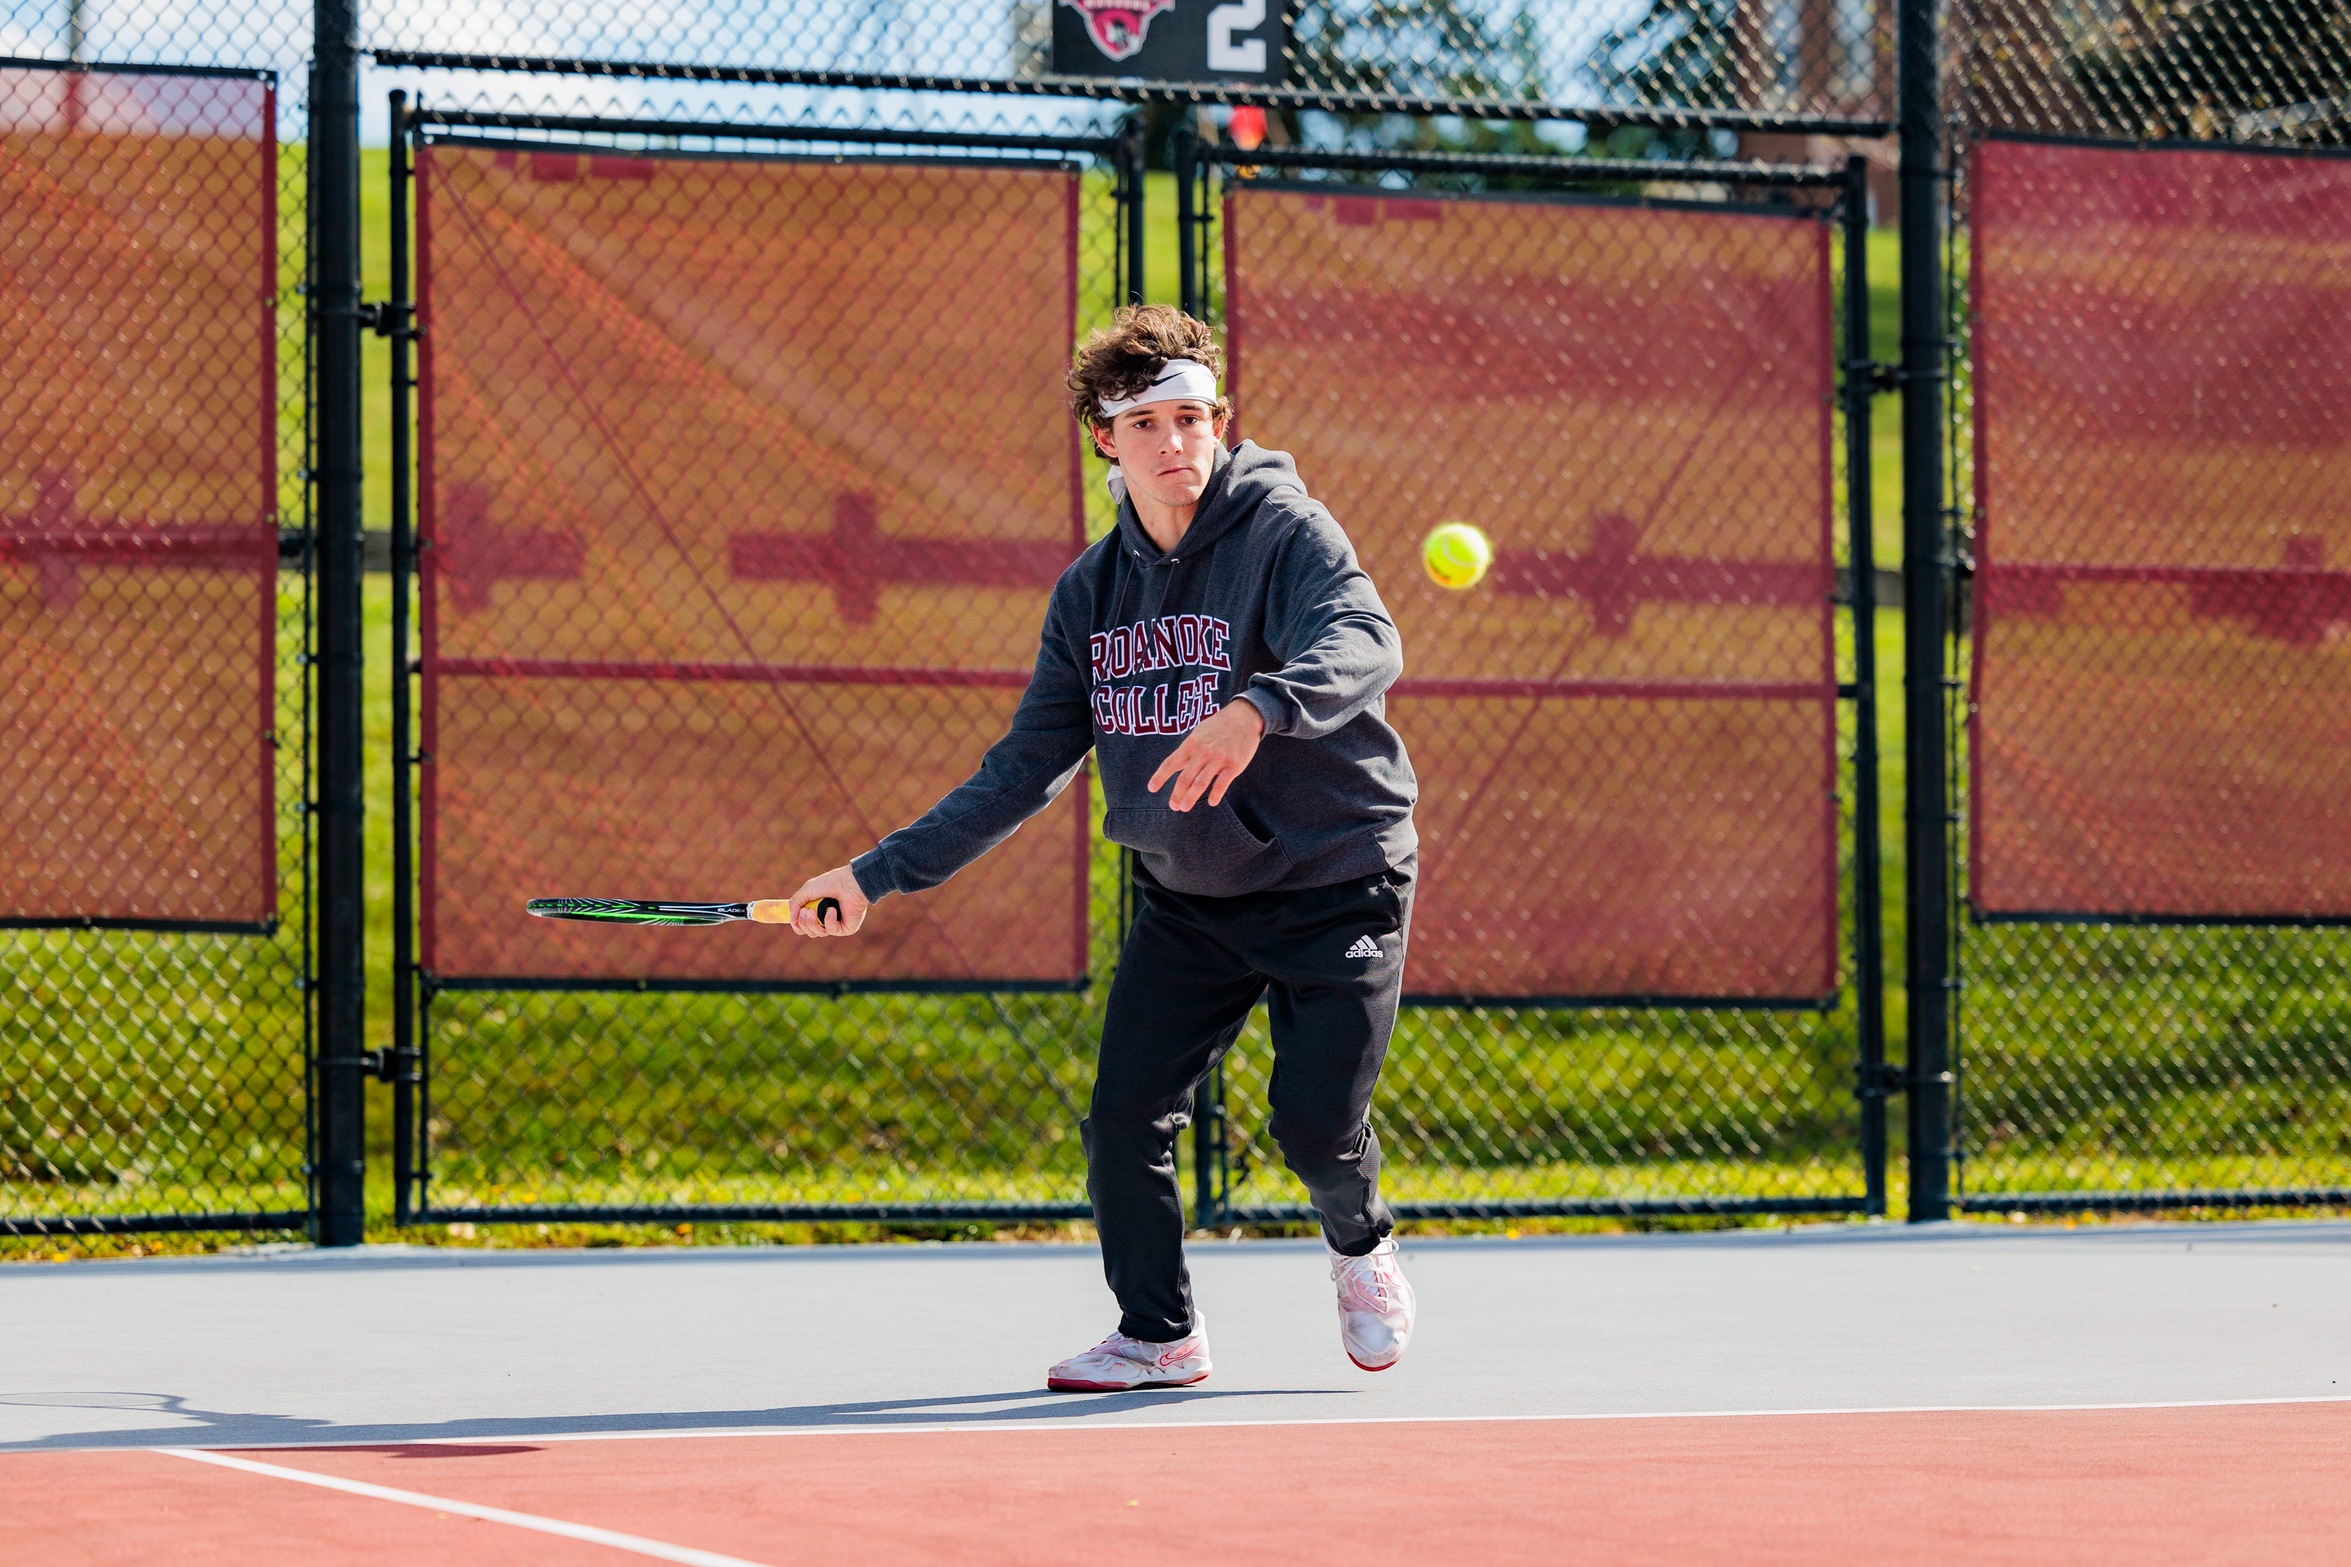 action photo of RC men's tennis player hitting a forehand